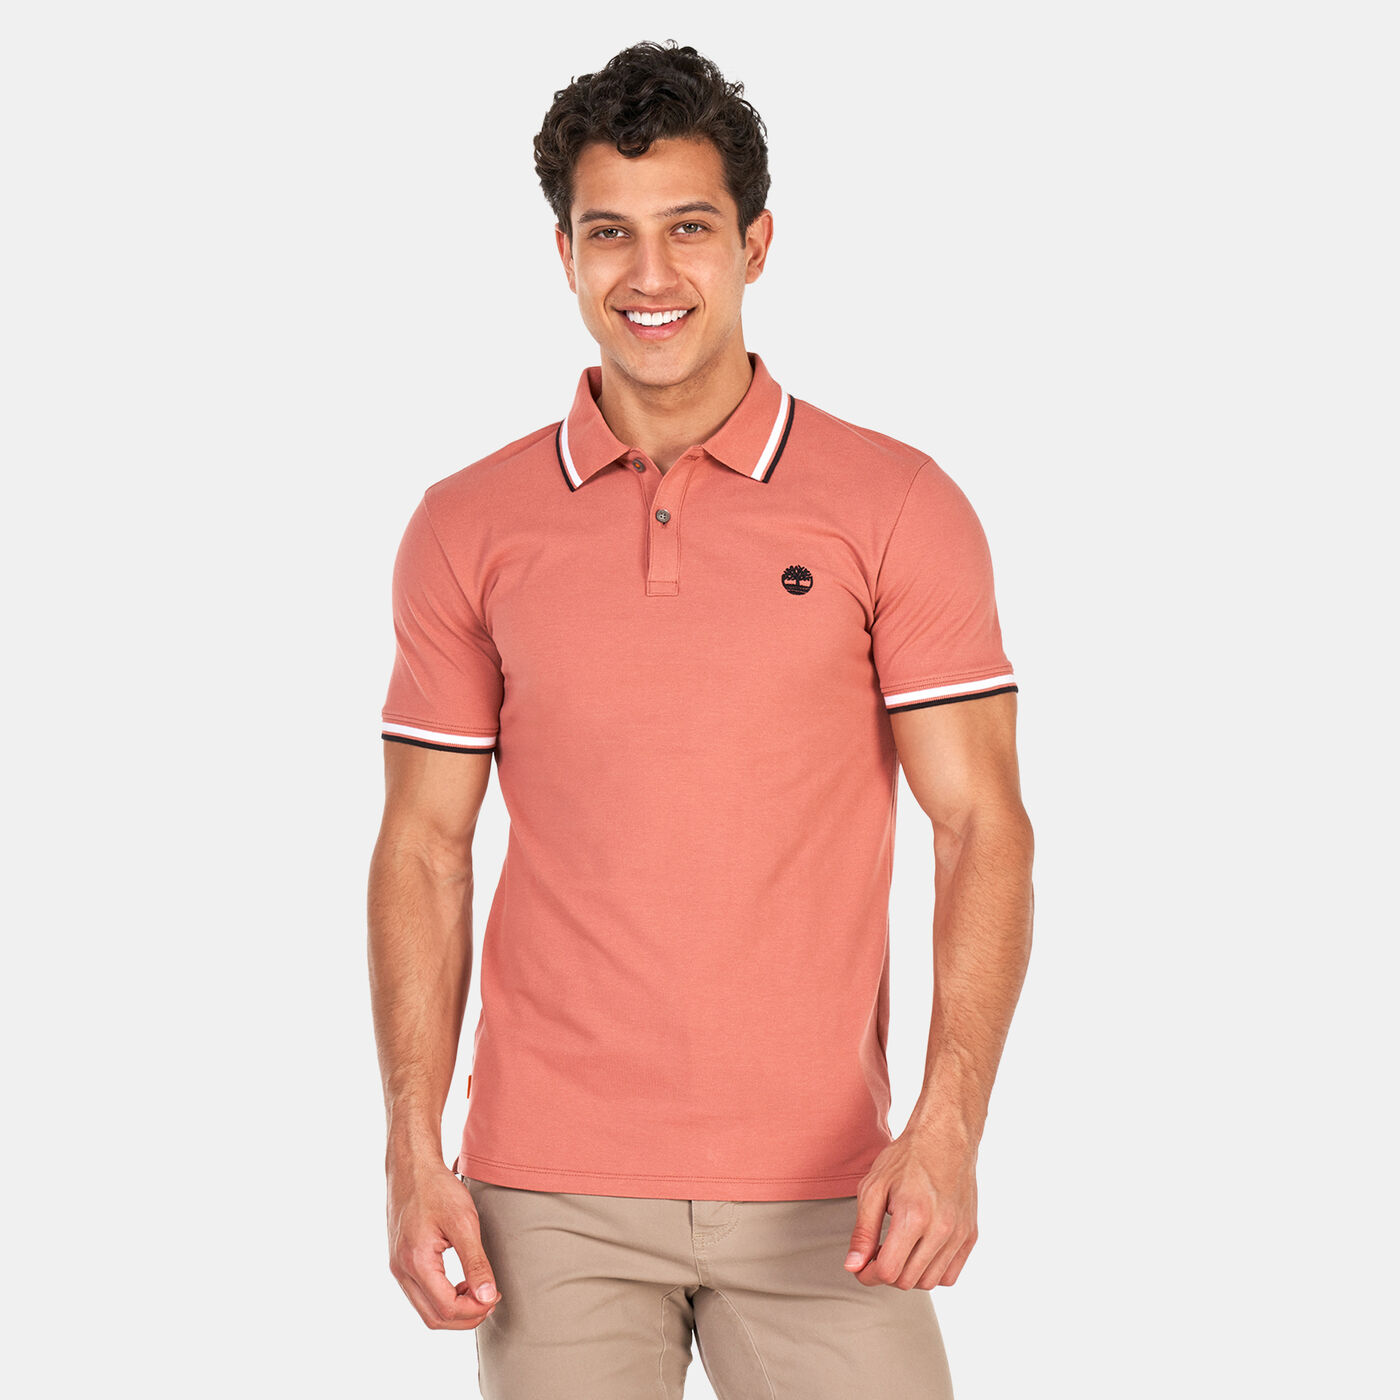 Men's Millers River Tipped Pique Polo Shirt